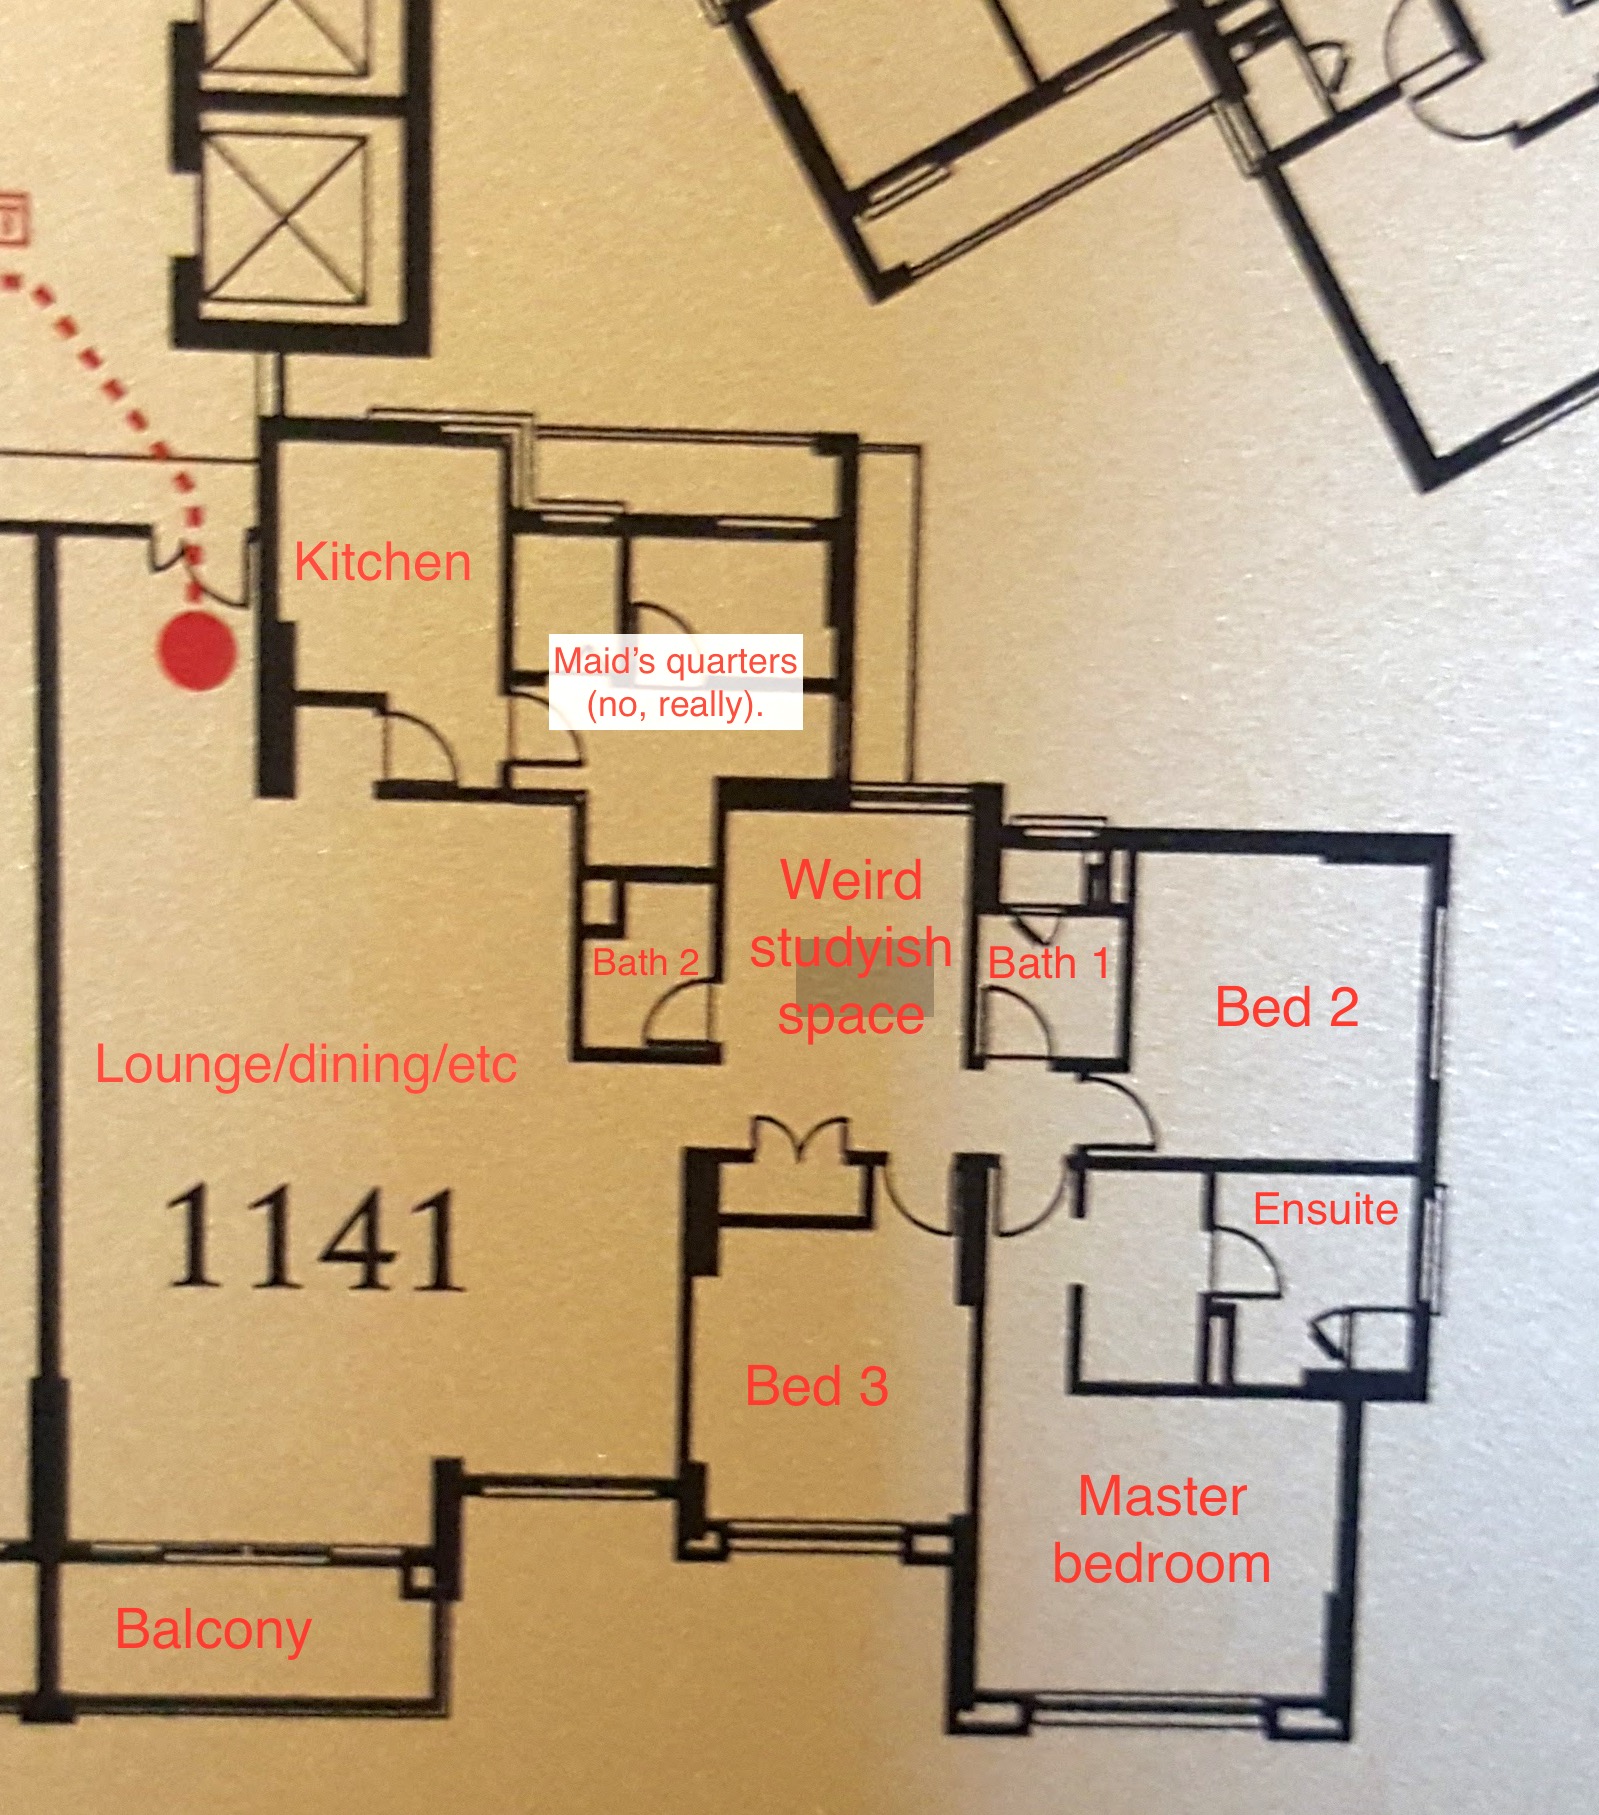 This badly-annotated floor plan is from the emergency exit diagram on the back of our front door.